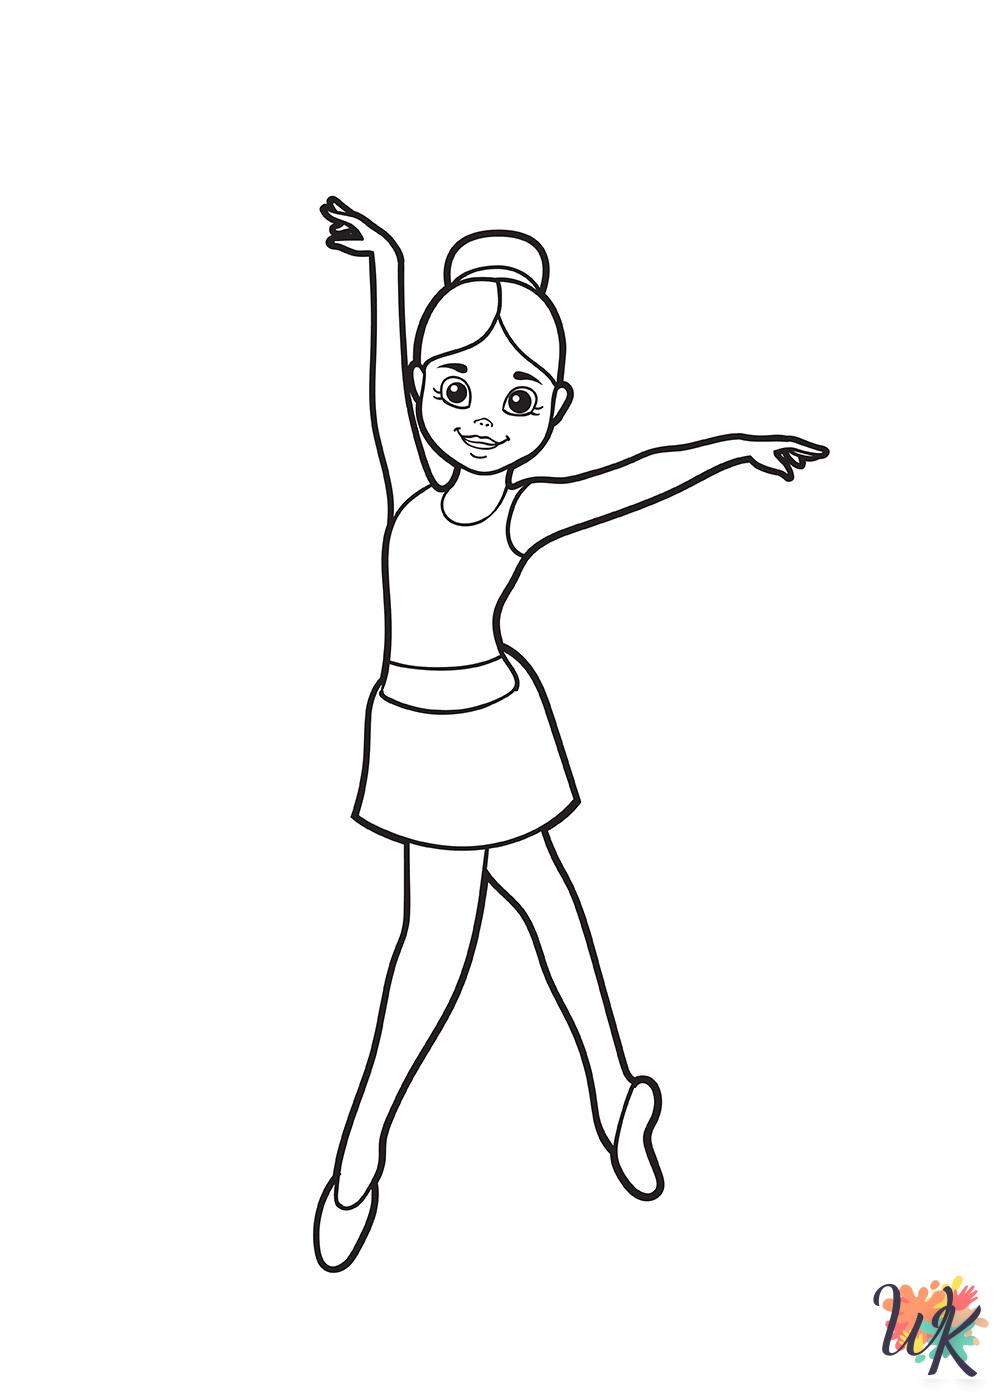 Ballerina free coloring pages 1